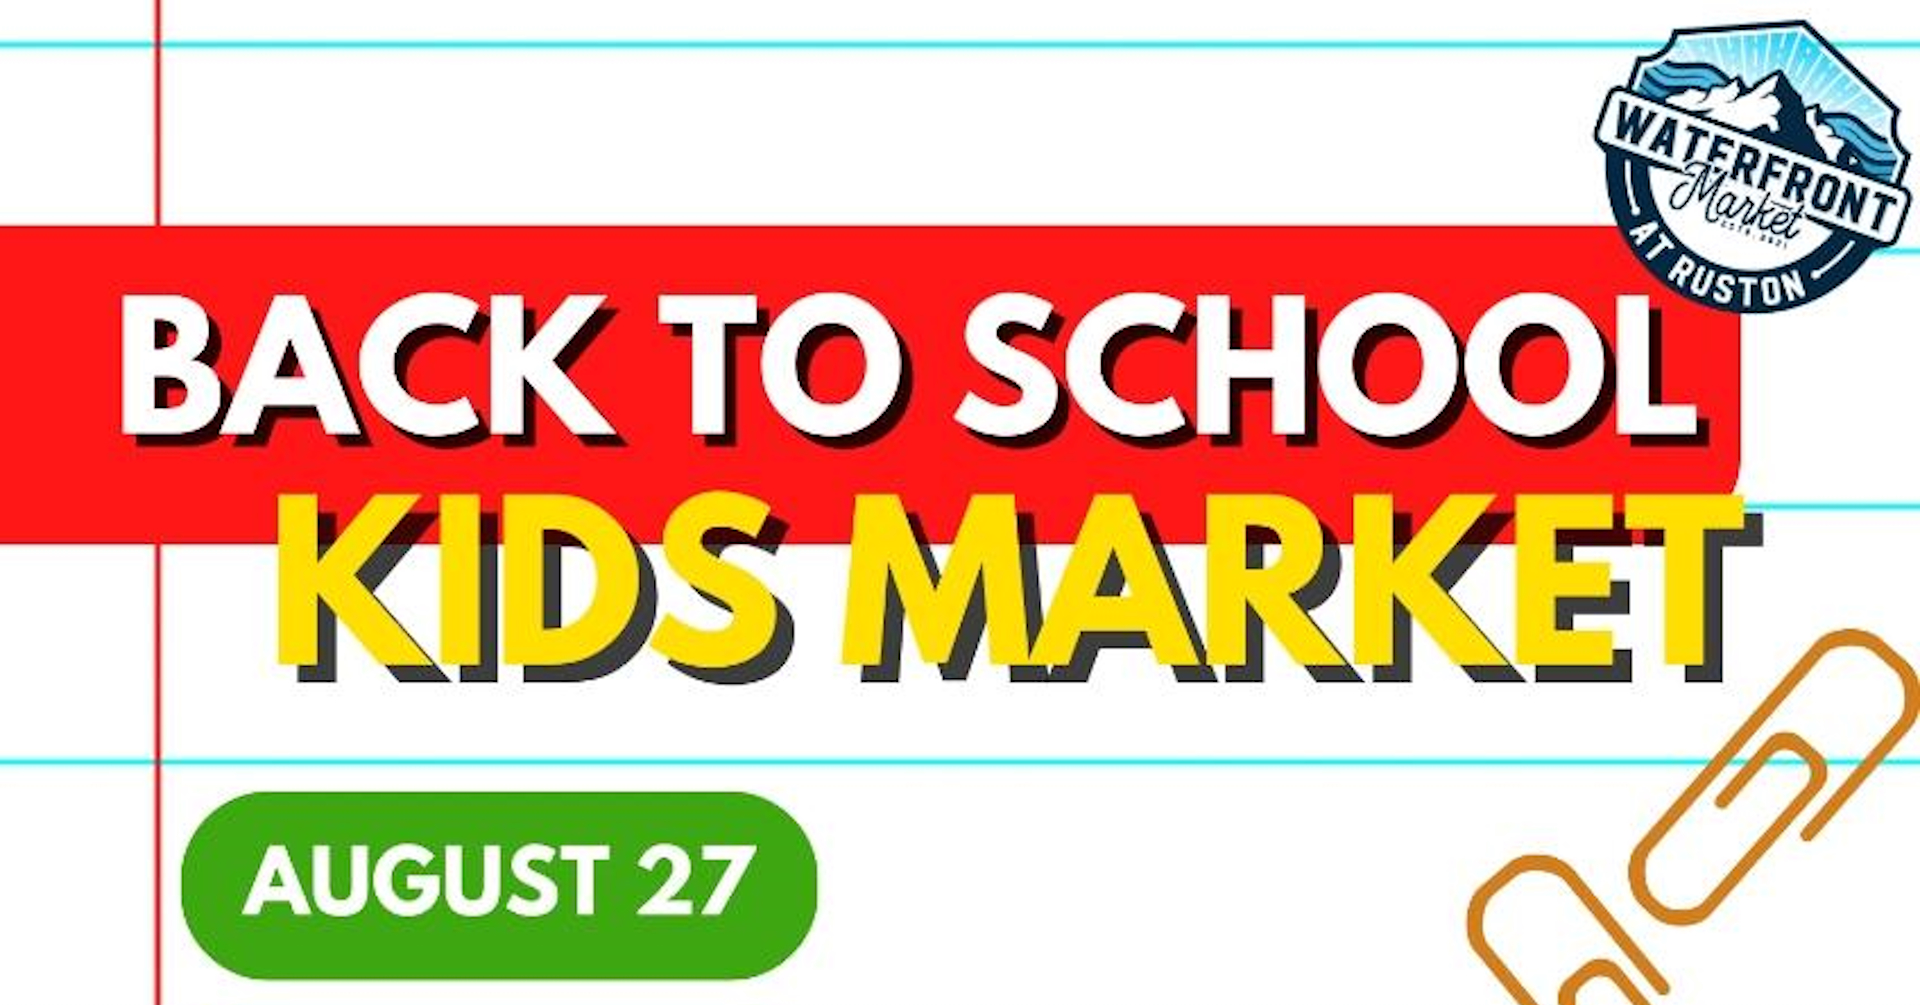 Back to School Kids Market - August 27th - lots of kids activities in Tacoma